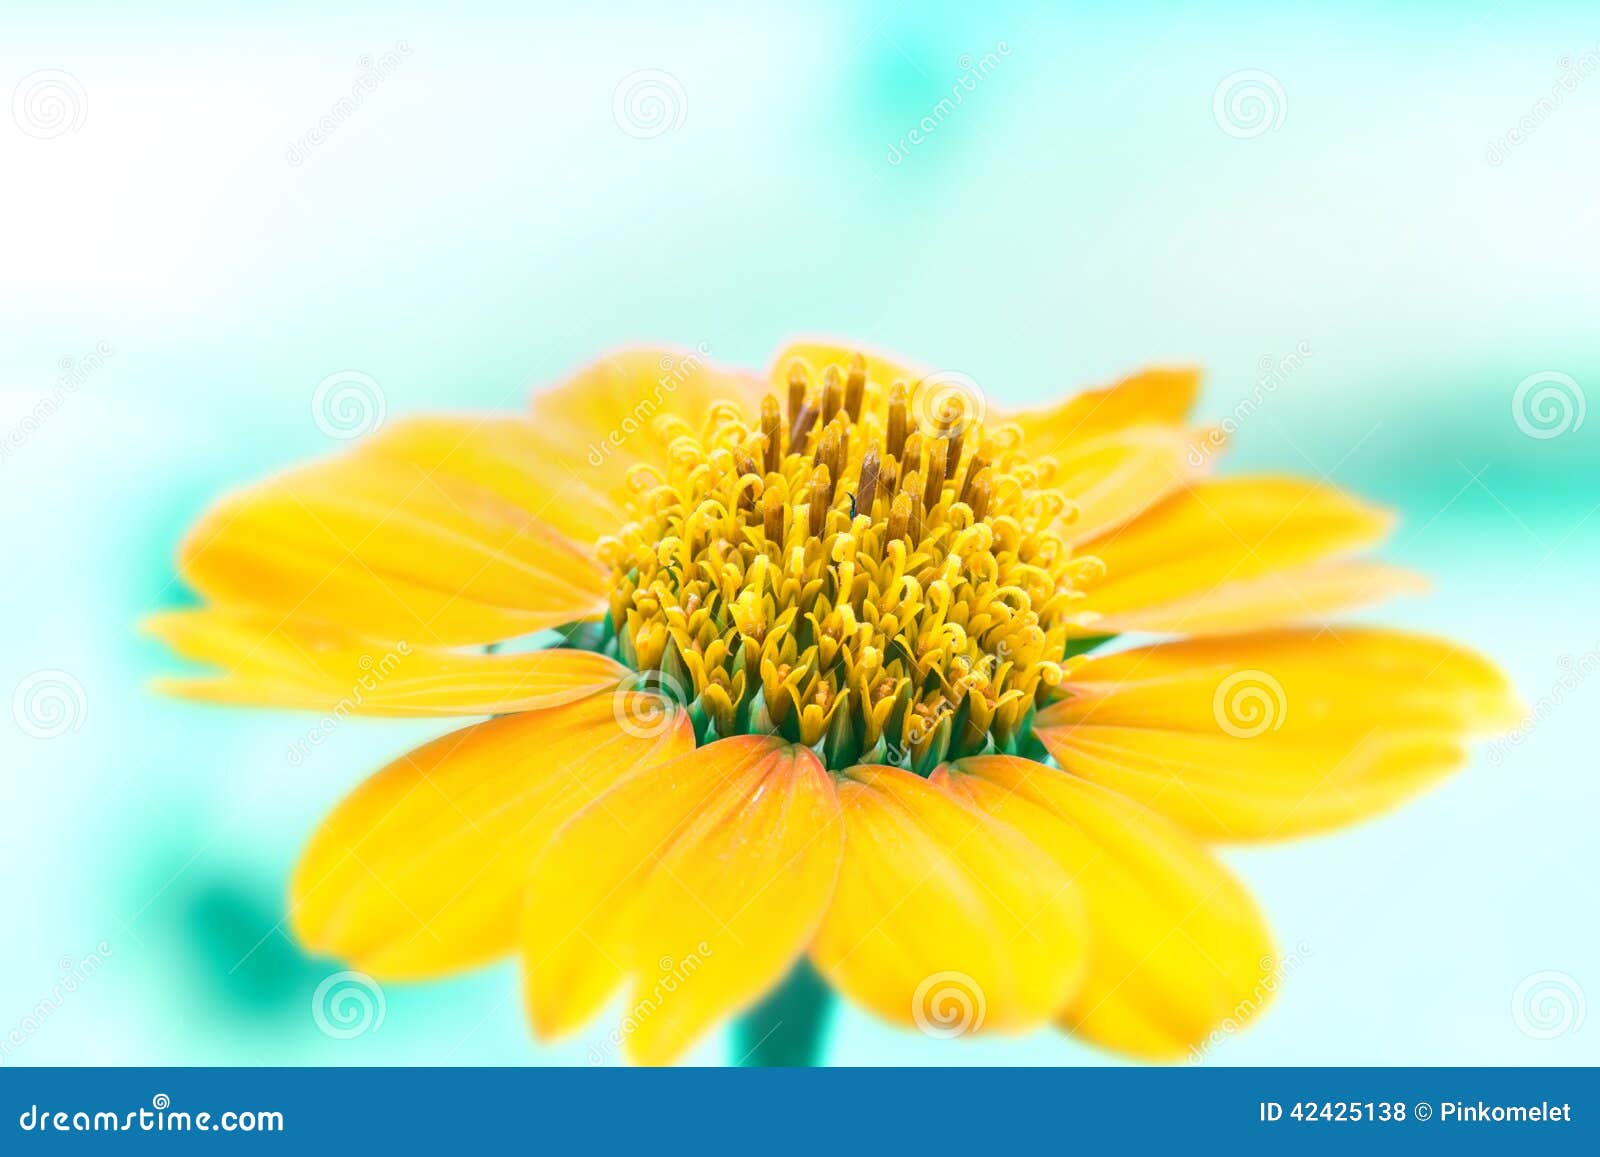 close up yellow flower with ligh blue background tone